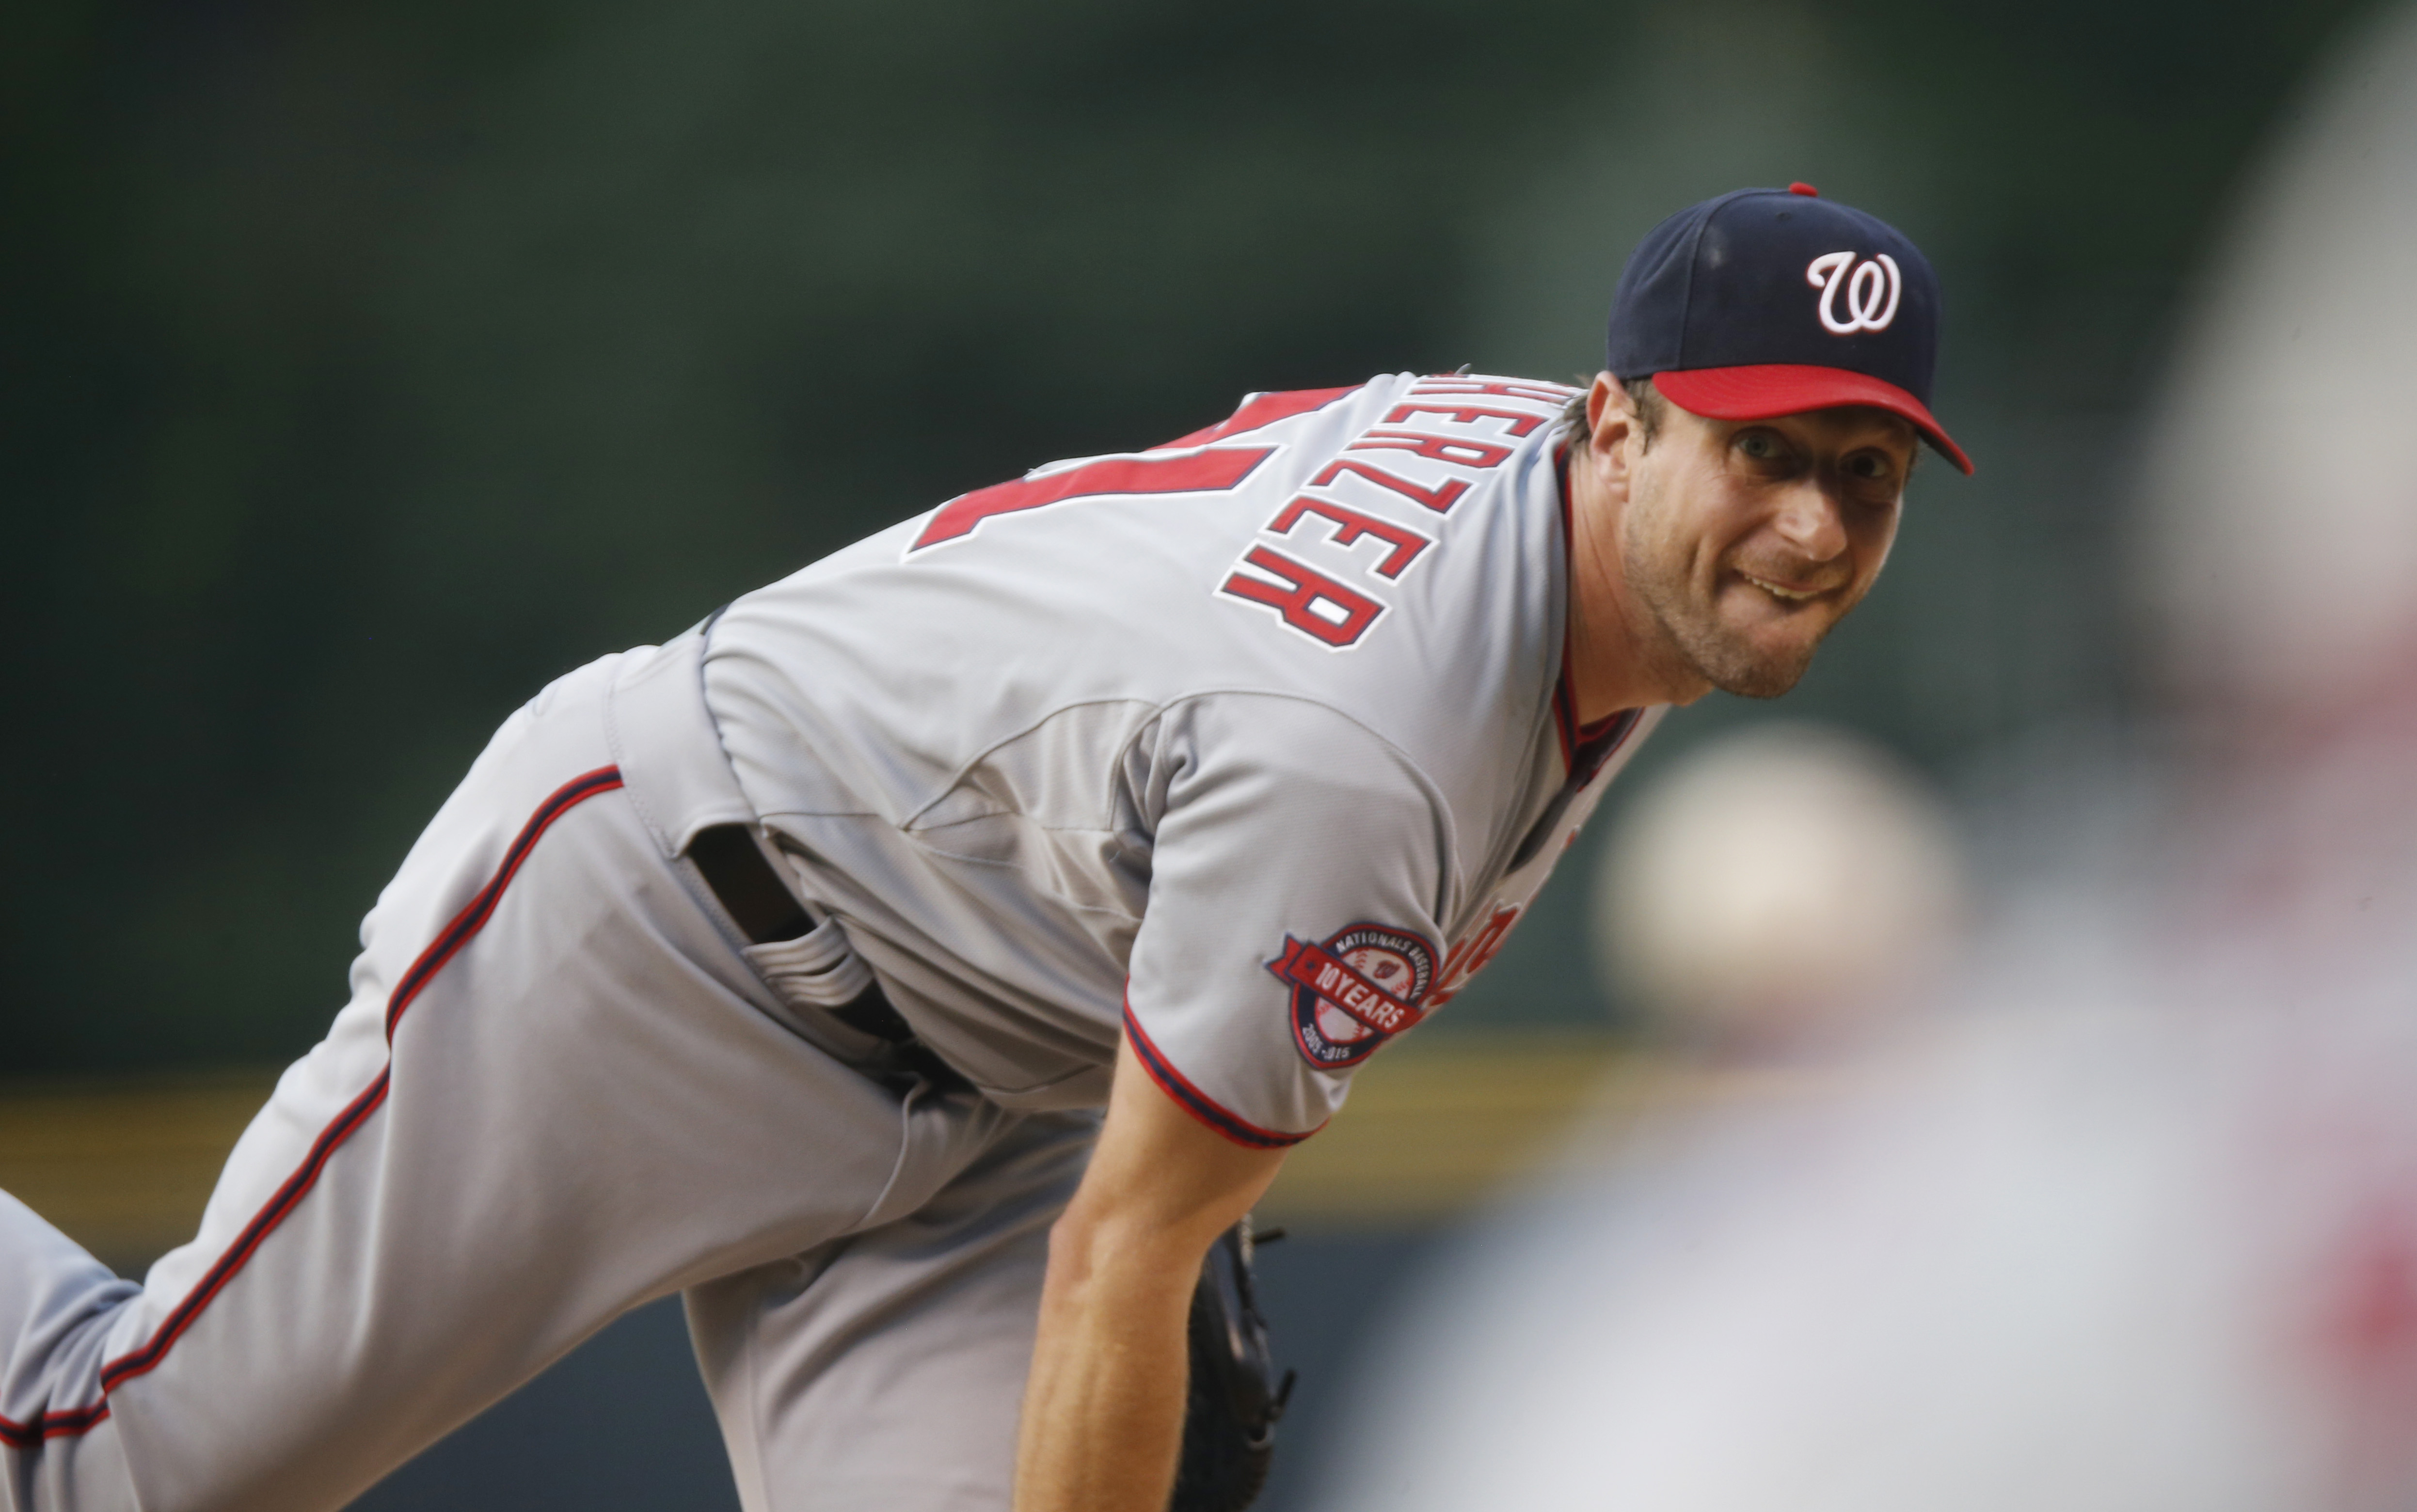 Scherzer gets 200th strikeout in Nationals’ loss to Rockies